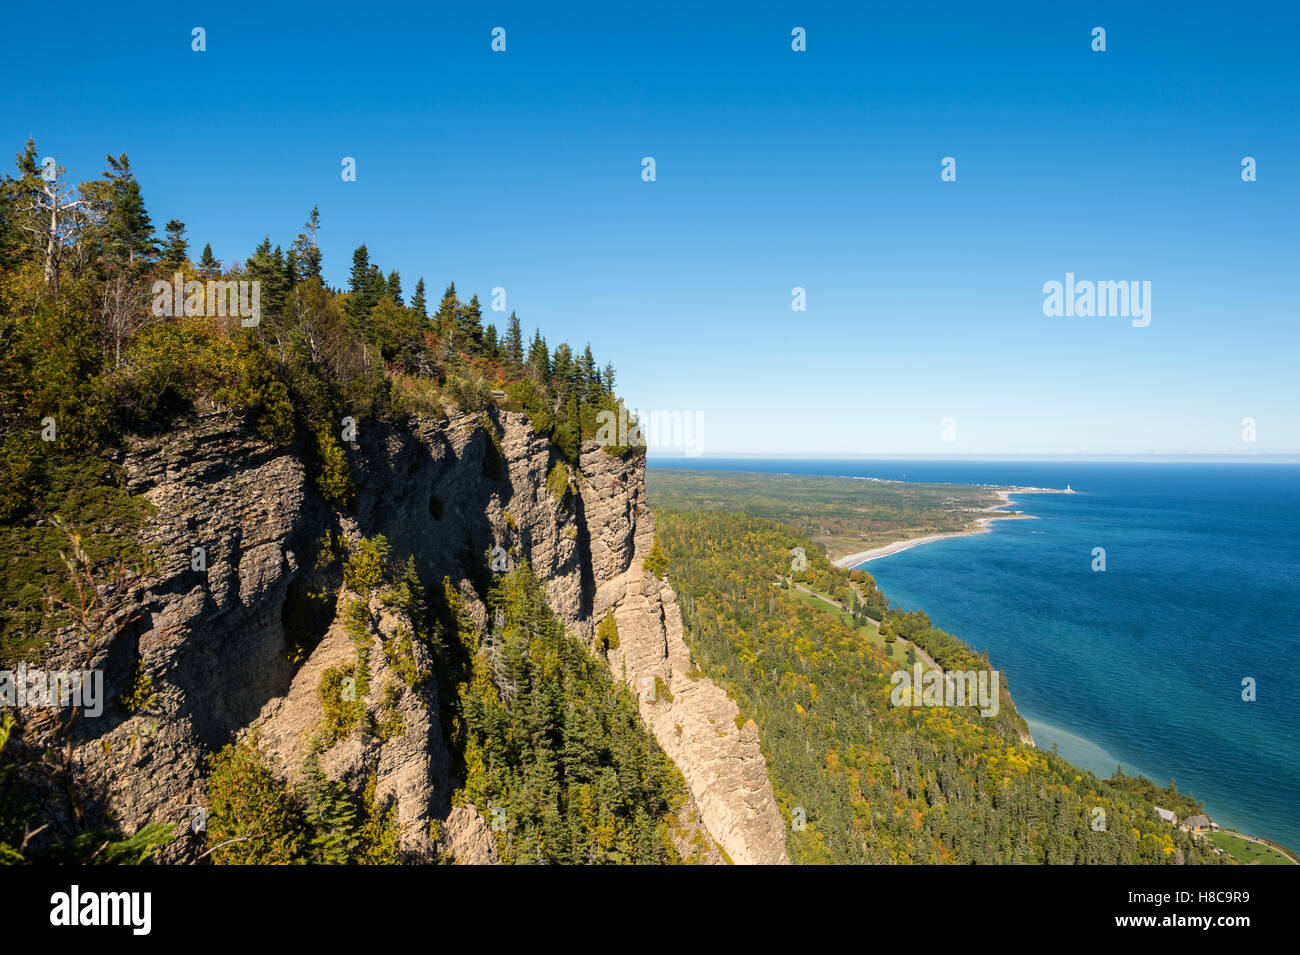 Cap-des-Rosiers as seen from Mont-St-Alban in Forillon National Park, Gaspe Peninsula, Quebec, Canada Stock Photo